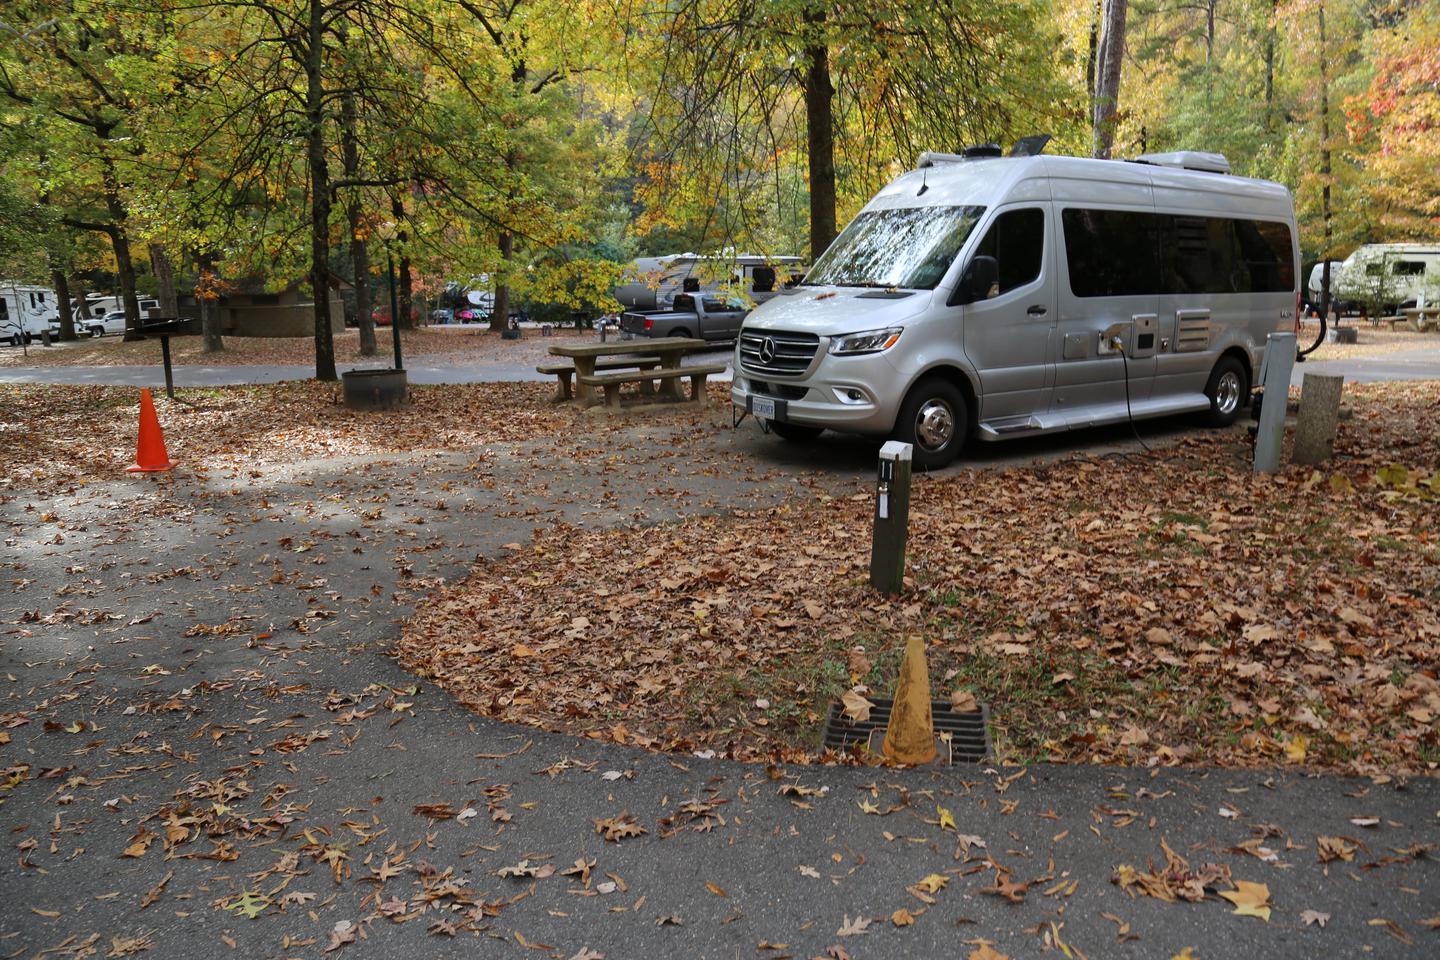 Small campervan in paved campsite with picnic table and leaves on the ground surrounded by treesCampsite 11